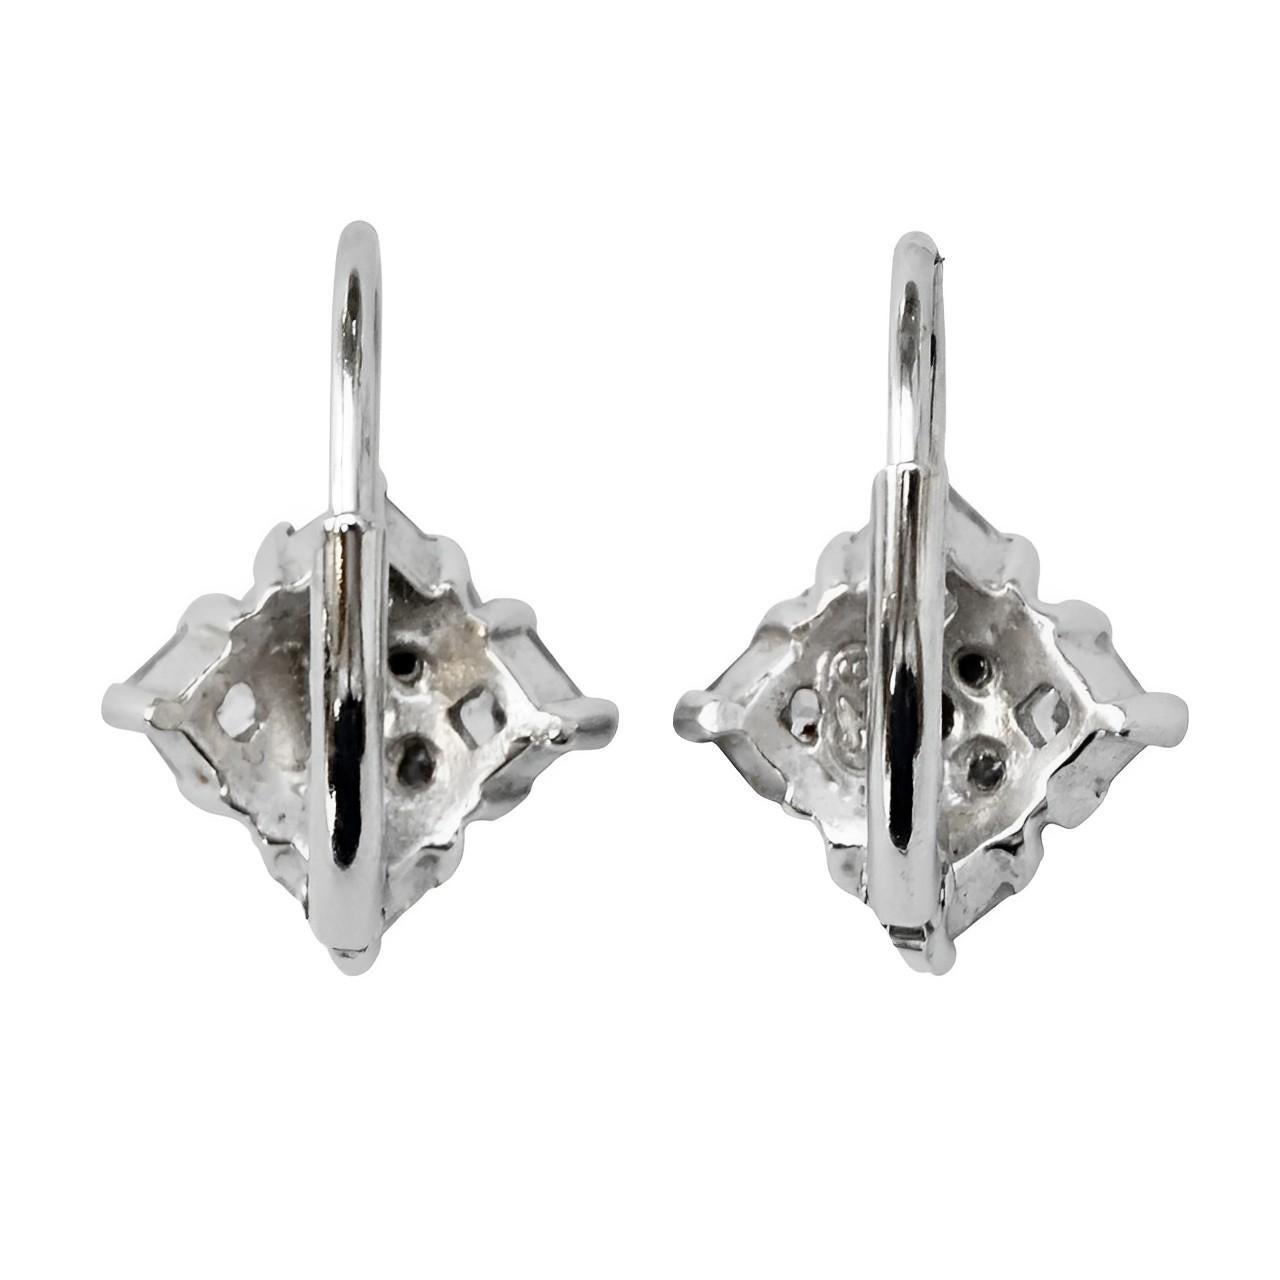 Beautiful sterling silver lever back earrings featuring square and round faceted rhinestones. Measuring 1.2 cm / .47 inch by  1.2 cm / .47 inch not including the fittings.

These are elegant and classic rhinestone earrings to go with many outfits.